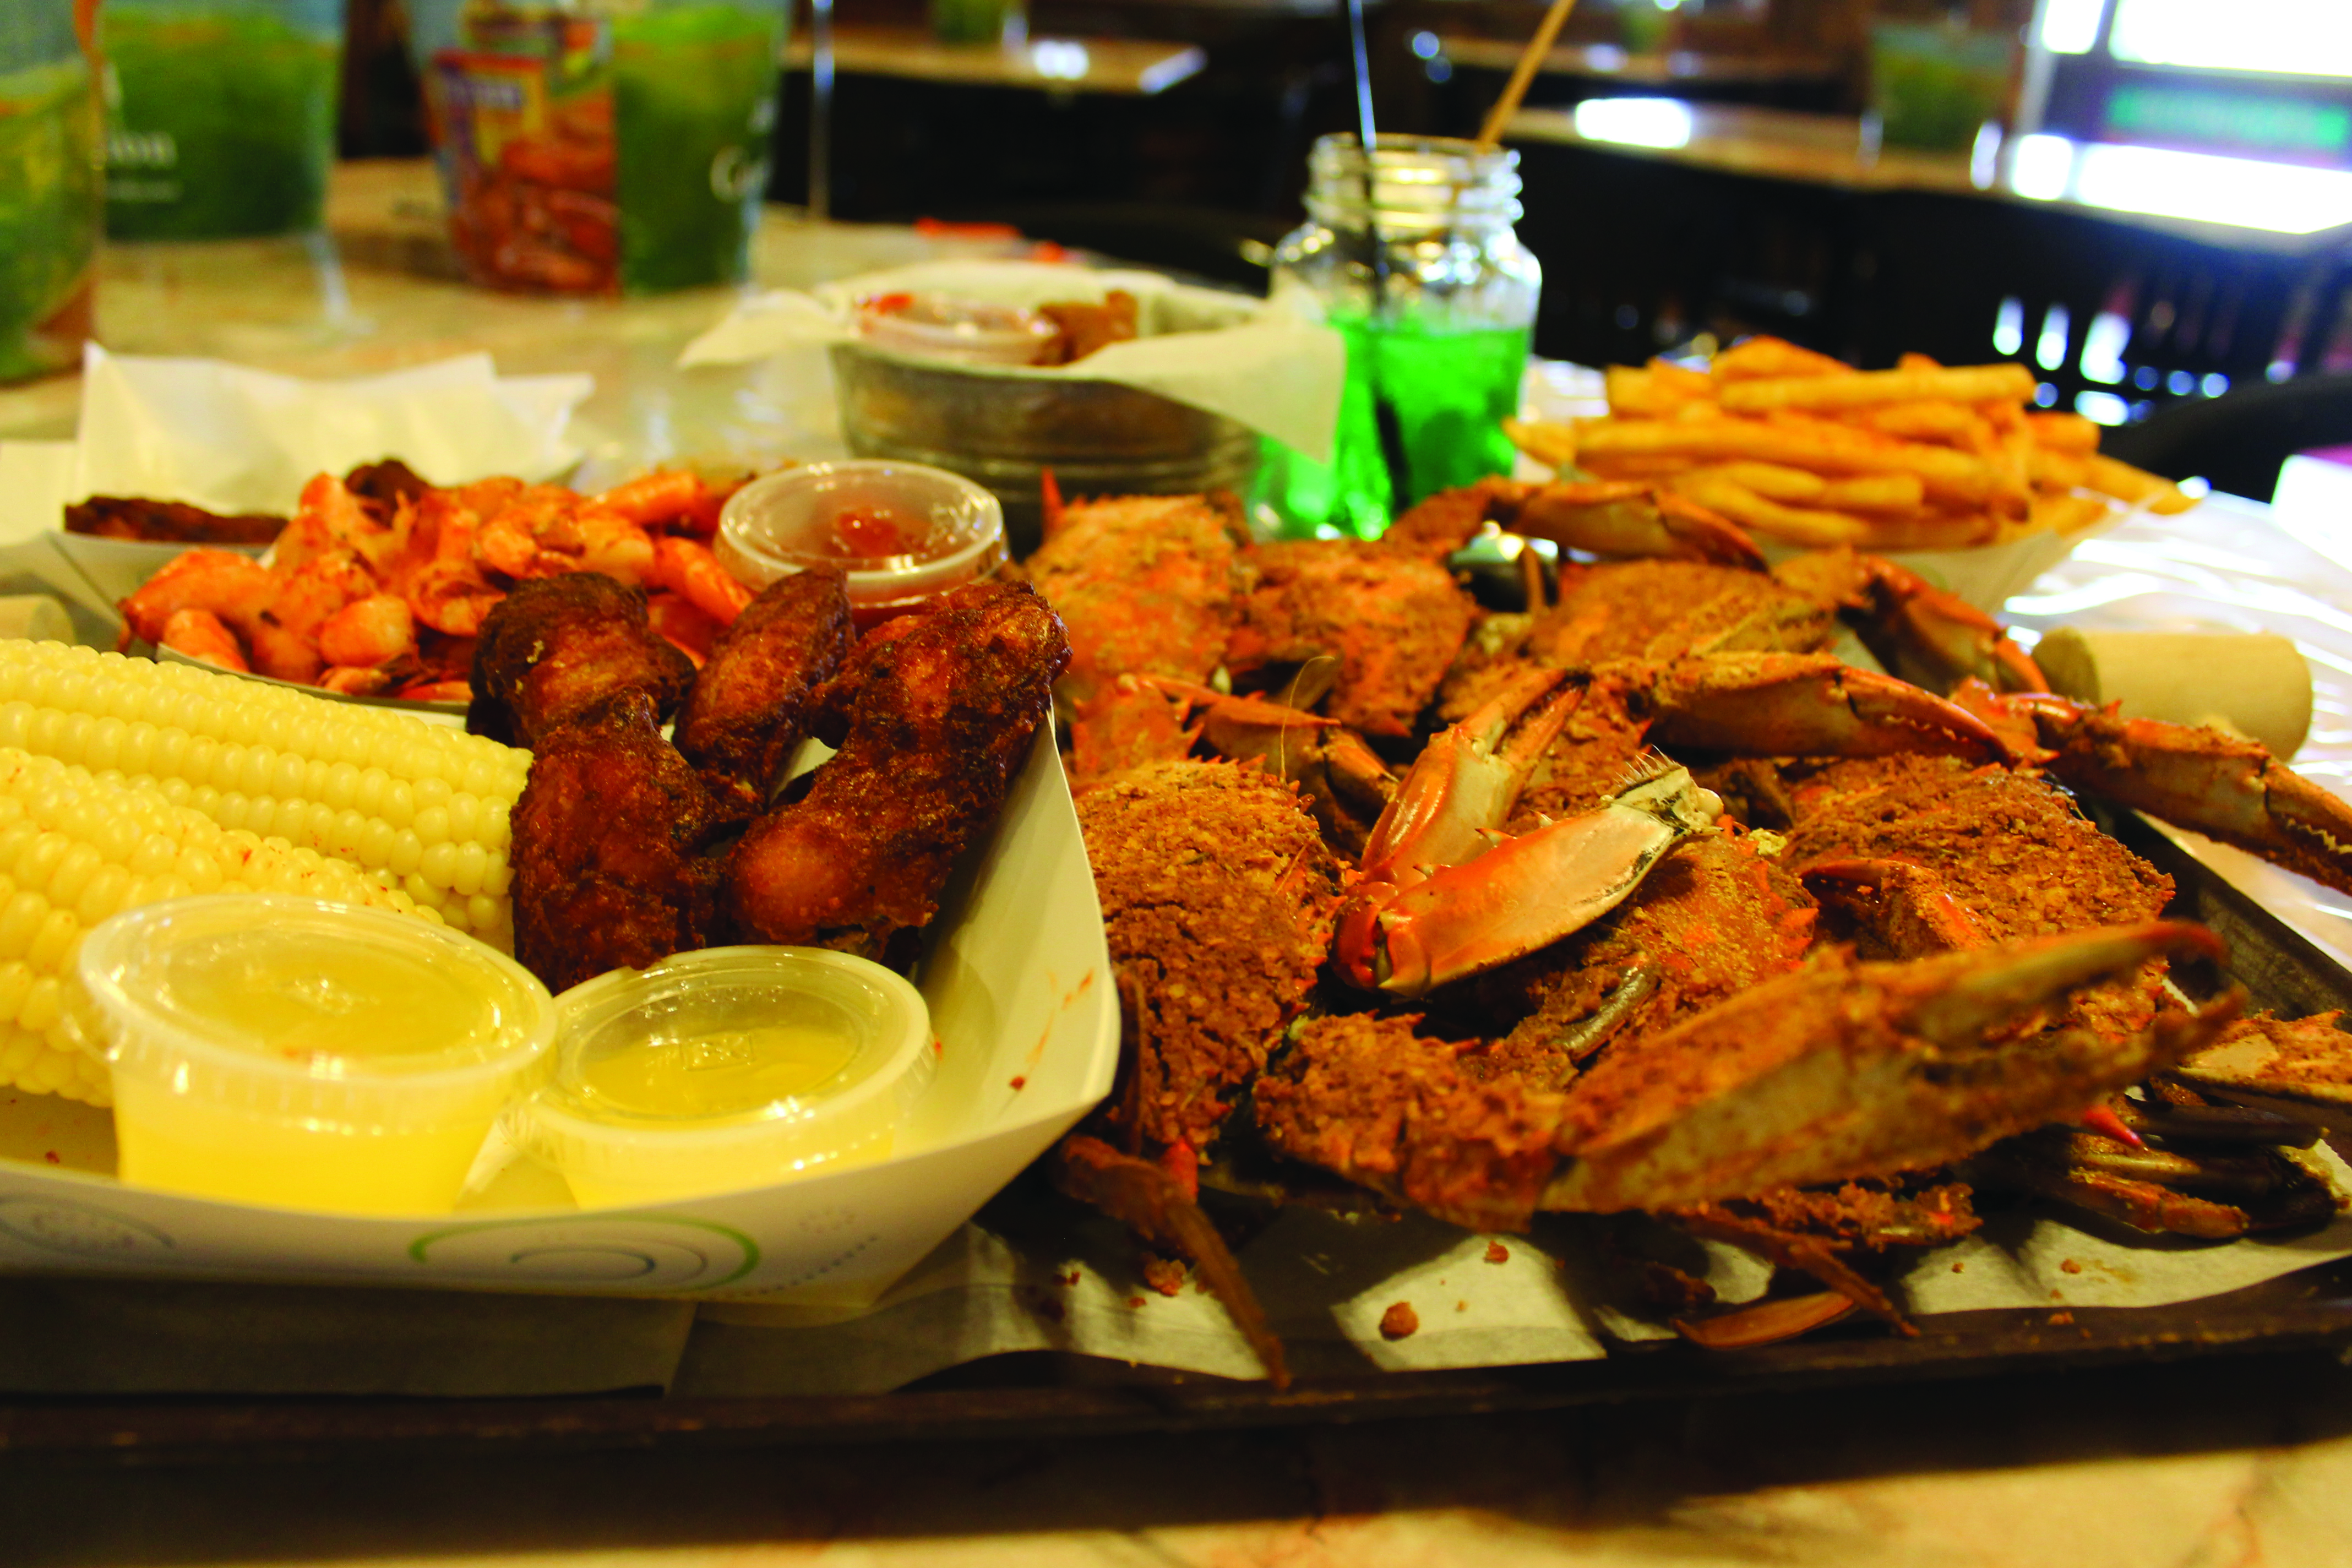 Boondocks serves just about every type of seafood you can imagine.